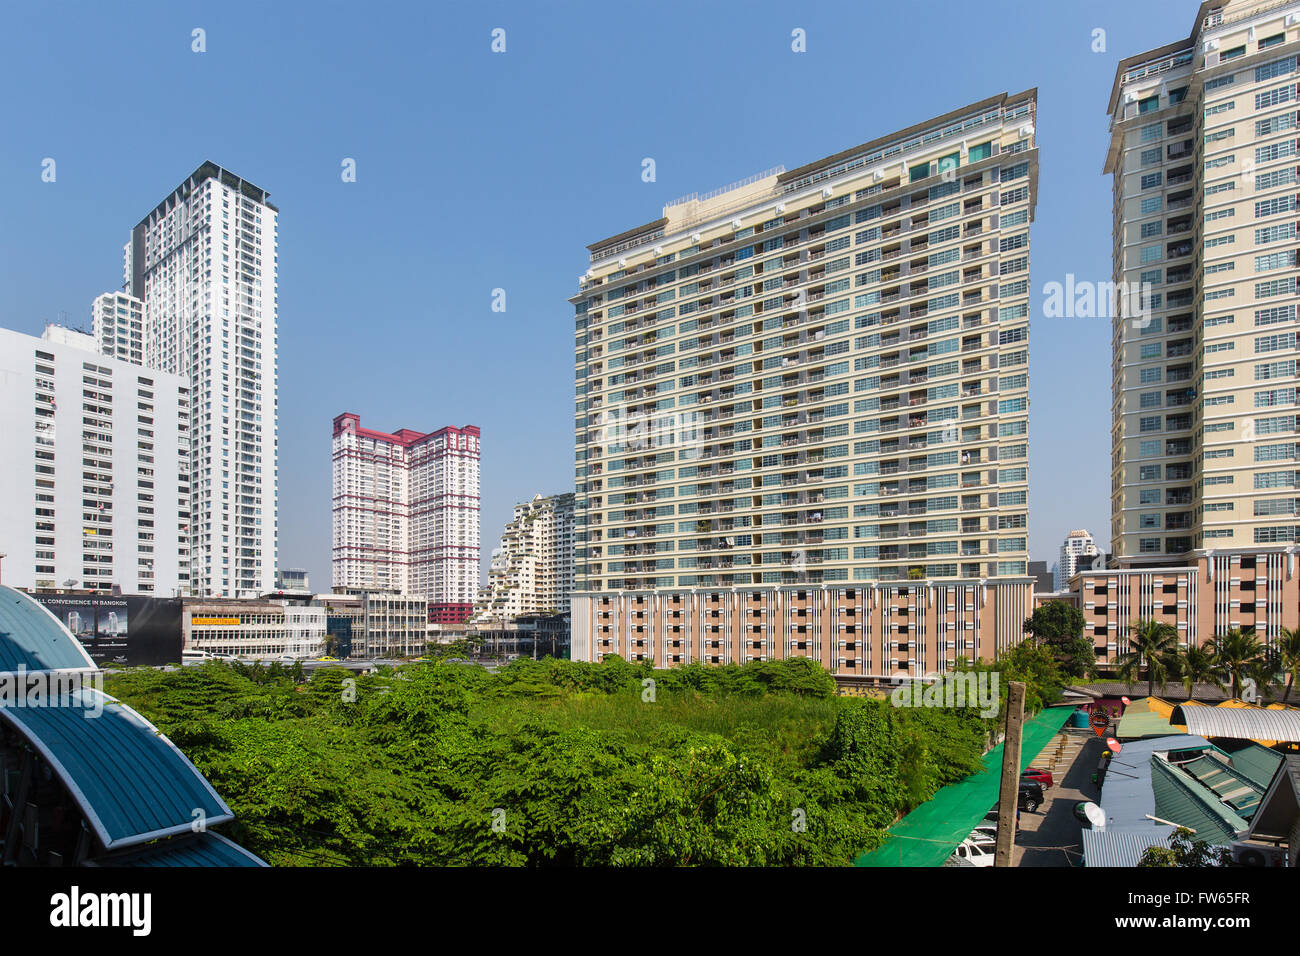 Condominiums or freehold flats, residential blocks at the Ratchathewi BTS station, Bangkok, Thailand Stock Photo